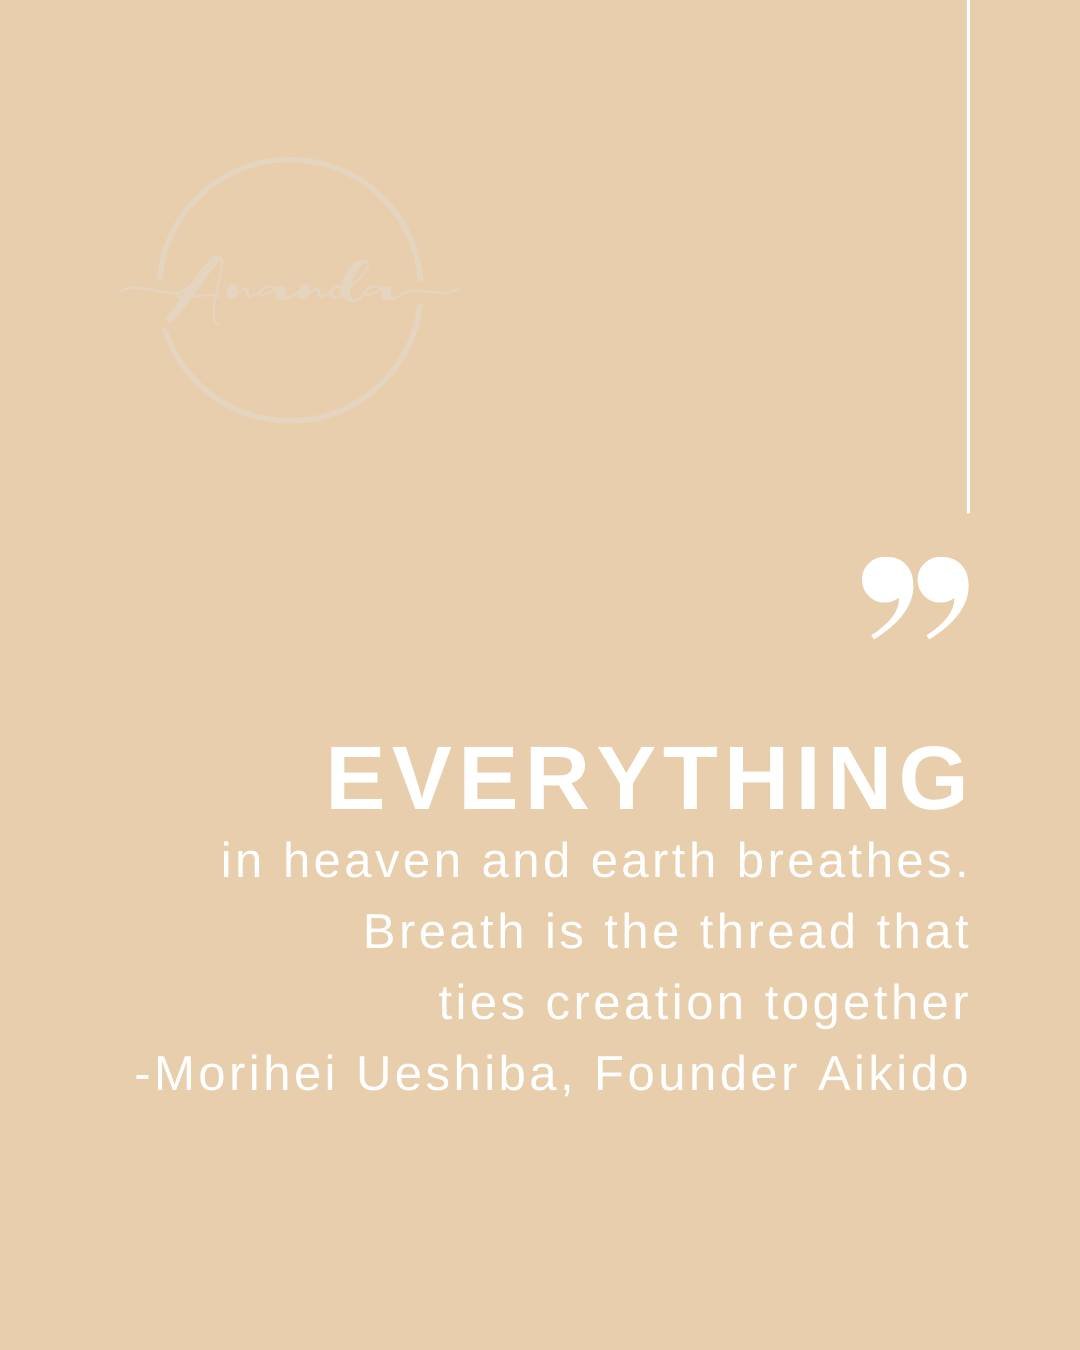 EVERYTHING 🍂

'Everything in heaven and earth breathes. Breath is the thread that ties creation together' - Morihei Ueshiba, Founder of Aikido 🩵

#breathe #breath #ananda #move #nourish #restore